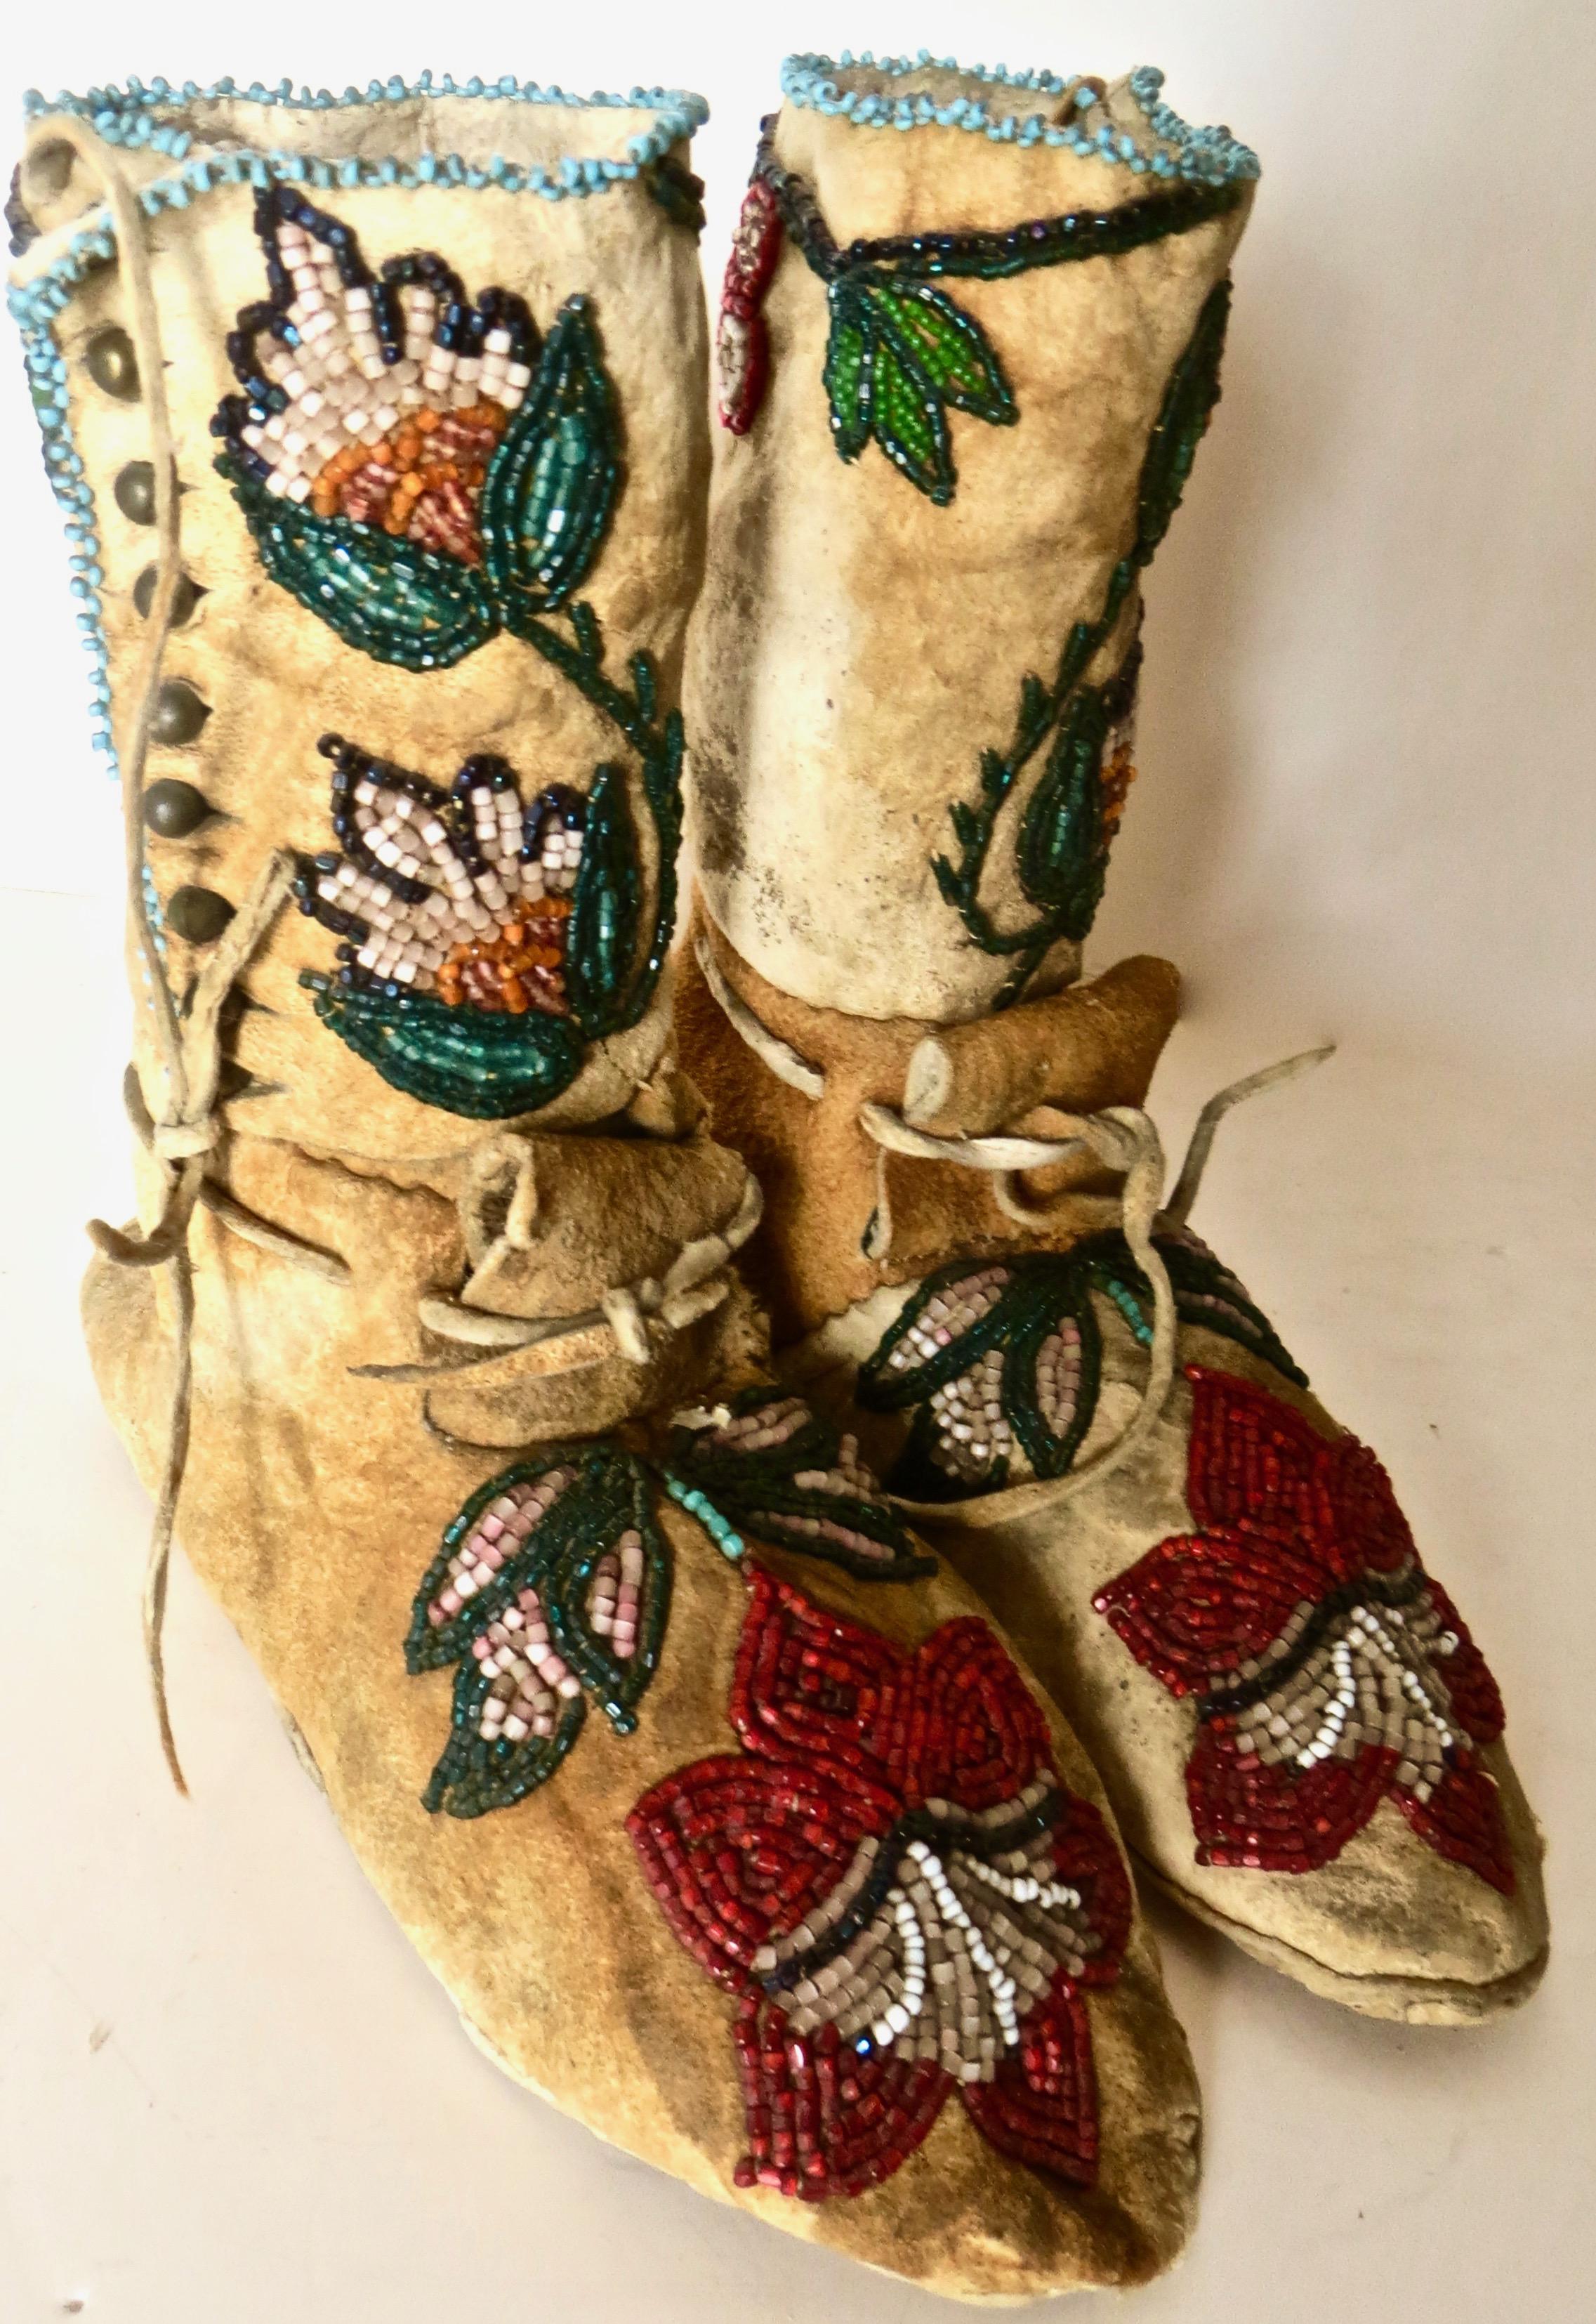 American Pair of Plateau Beaded Child's High Top Moccasins, circa 1890